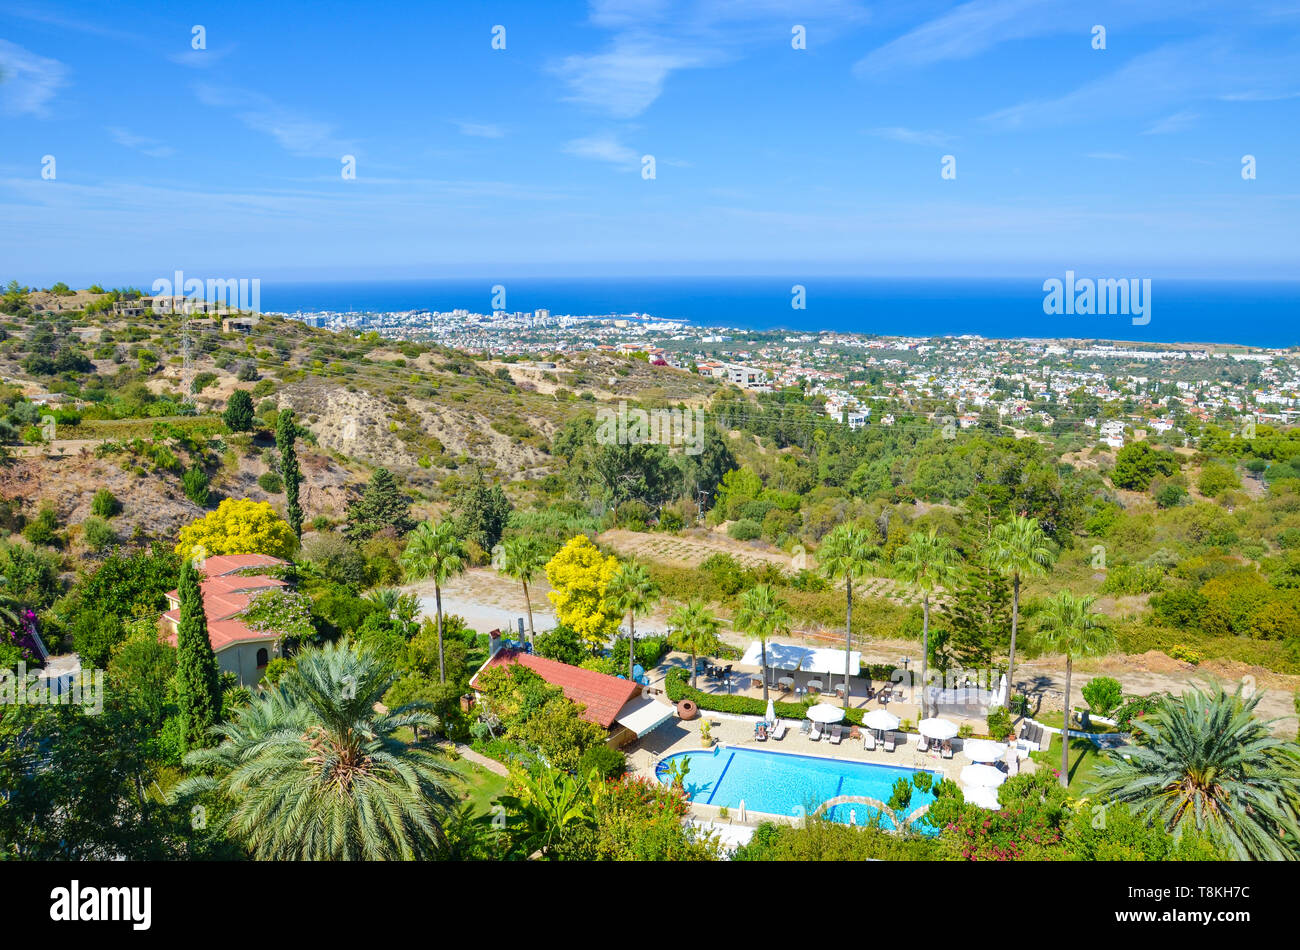 Paradise Mediterranean landscape in Kyrenia region, Northern Cyprus taken in late summer with rural buildings and hotel complexes with pools overlooking the sea. Amazing summer vacation destination. Stock Photo